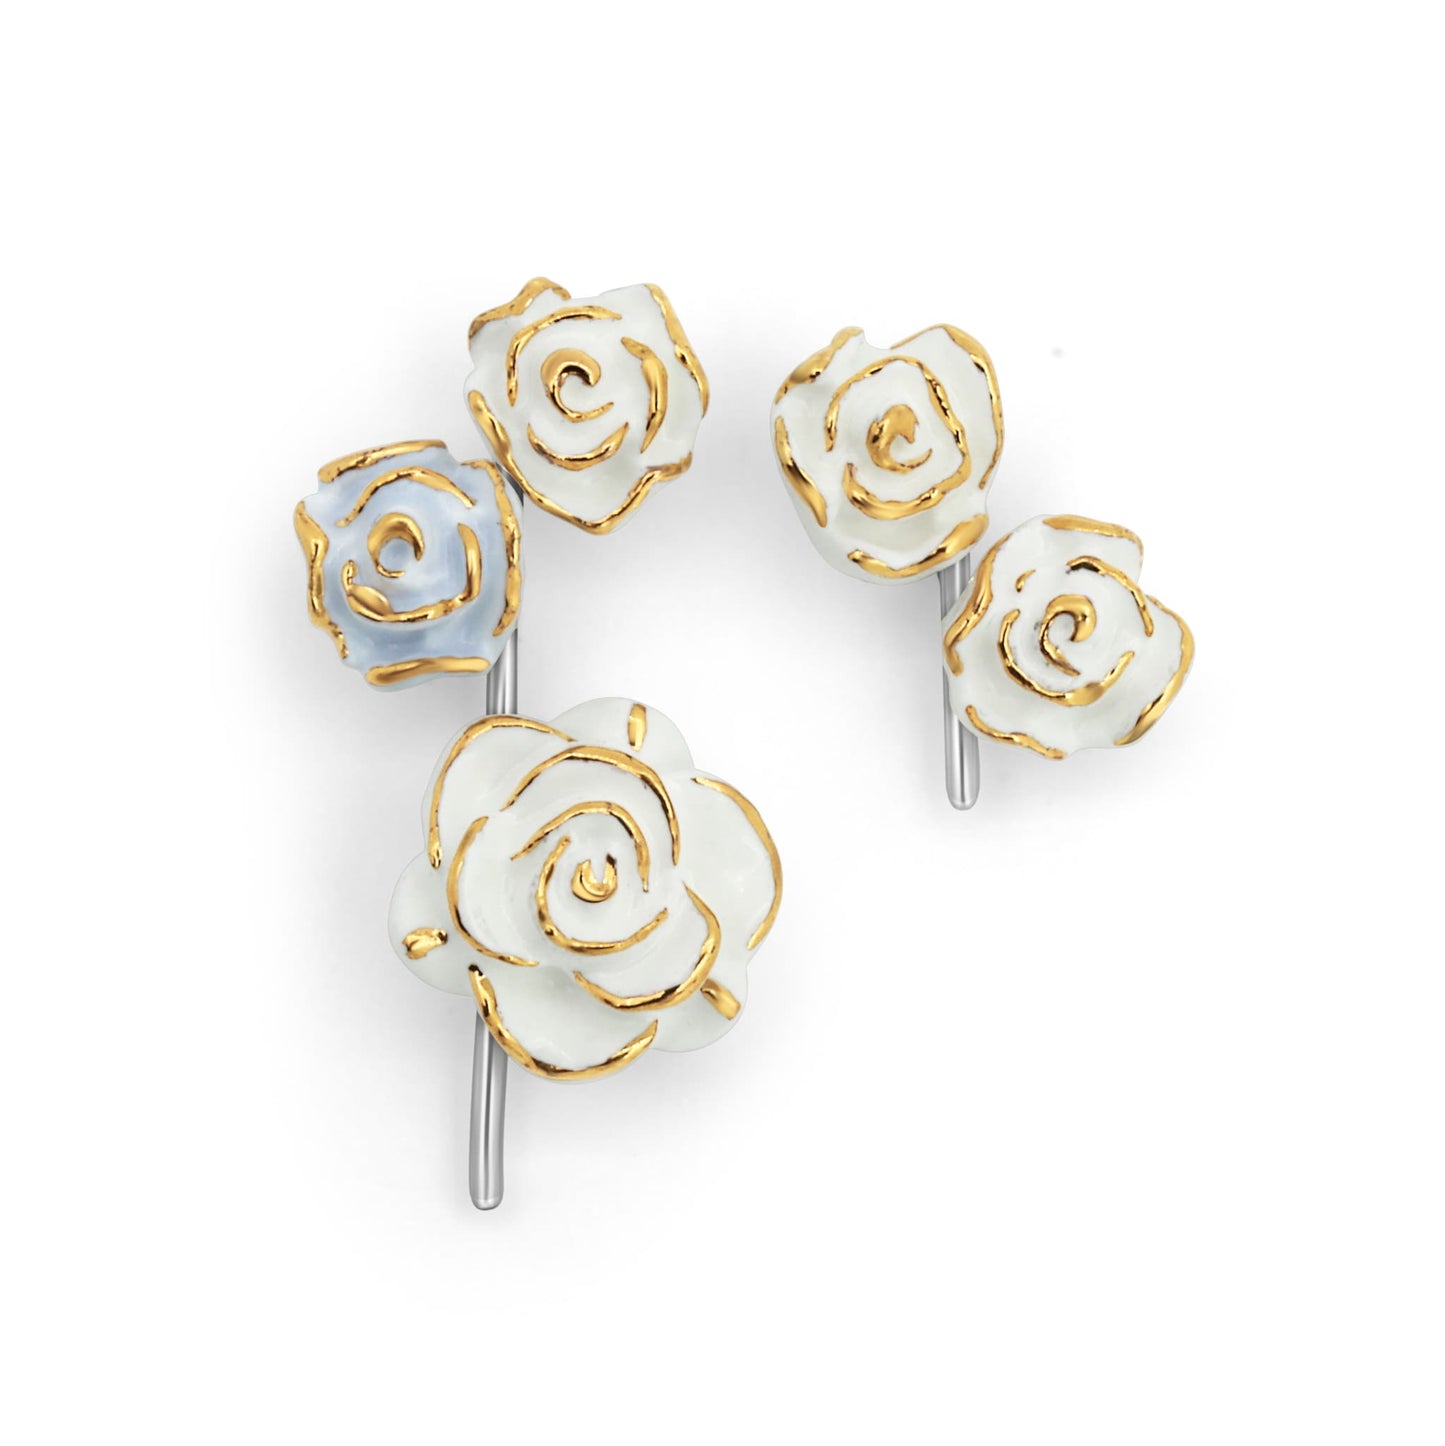 Floral earring Something Blue - SALE 50%